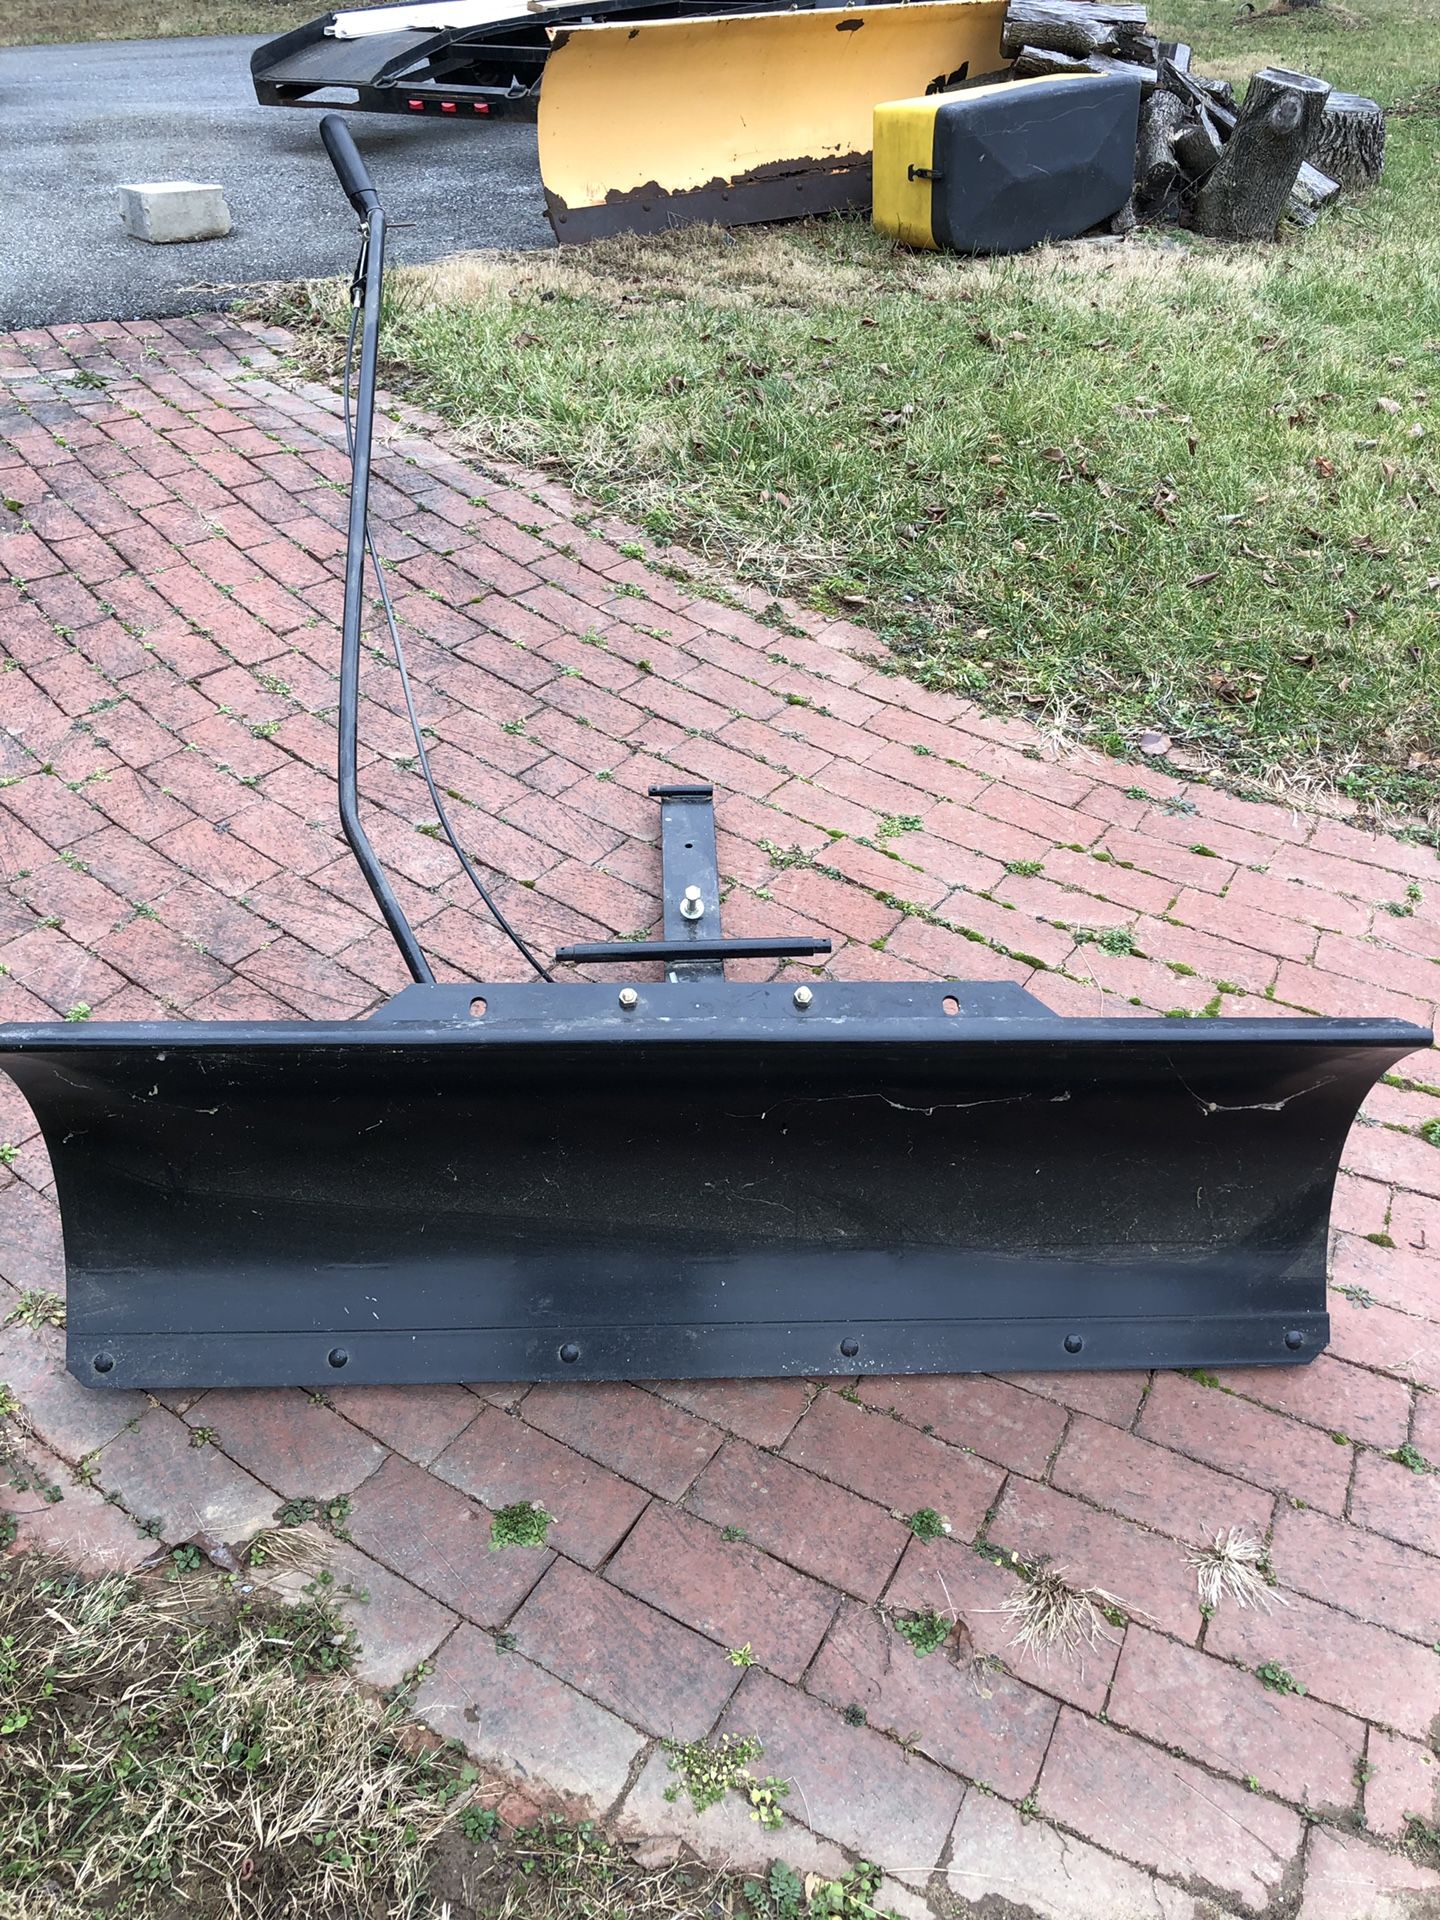 Snow plow for craftsman lawn mower